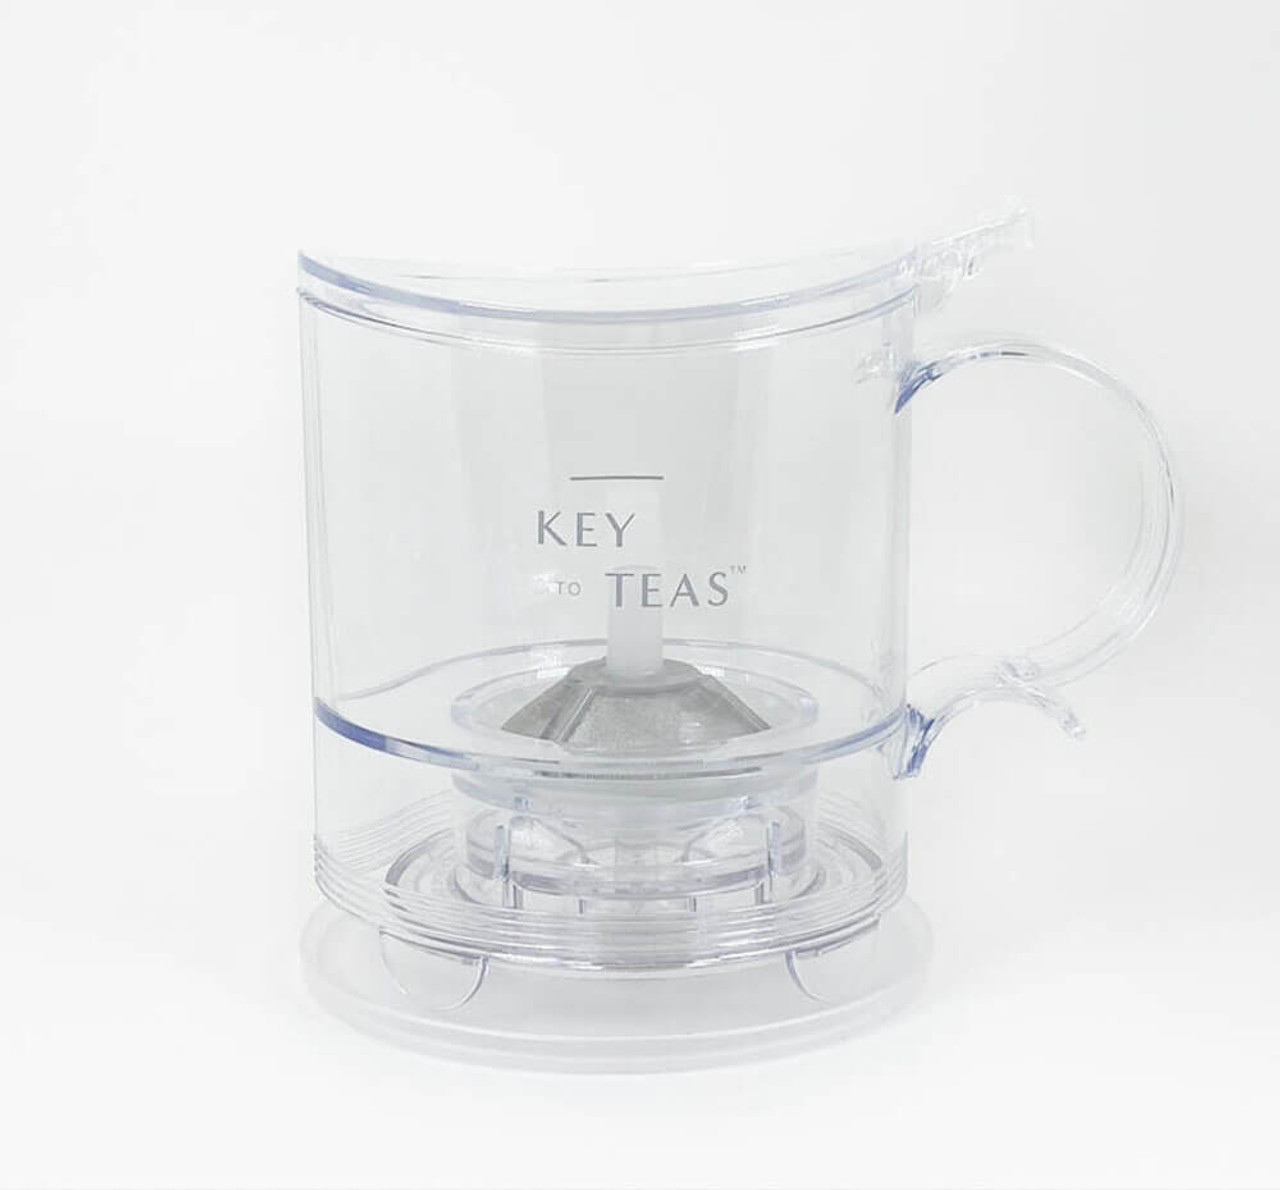 https://cdn11.bigcommerce.com/s-i6lxcyy4k3/images/stencil/1280x1280/products/168/611/micracle_tea_brewer_2_cup__25358.1610057136.jpg?c=1